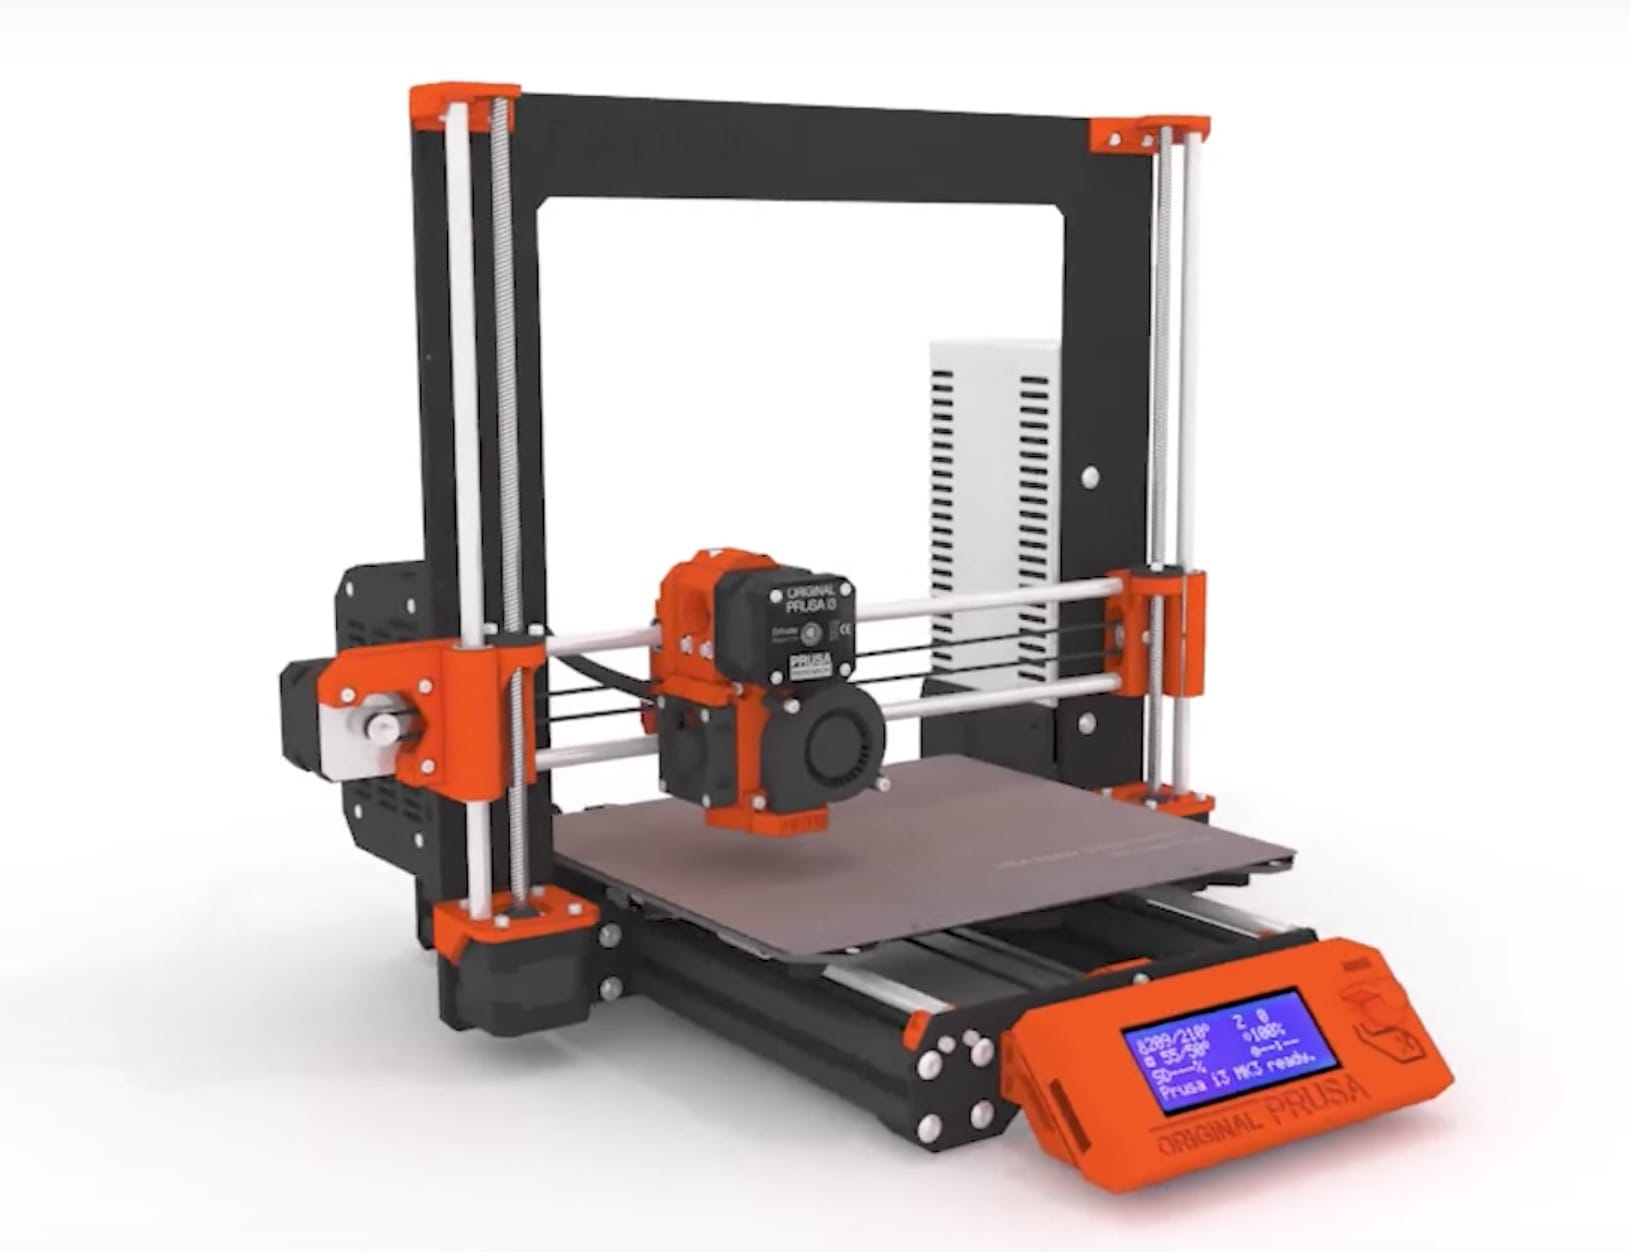  The all-new Original Prusa i3 MK3 desktop 3D printer, with many new features 